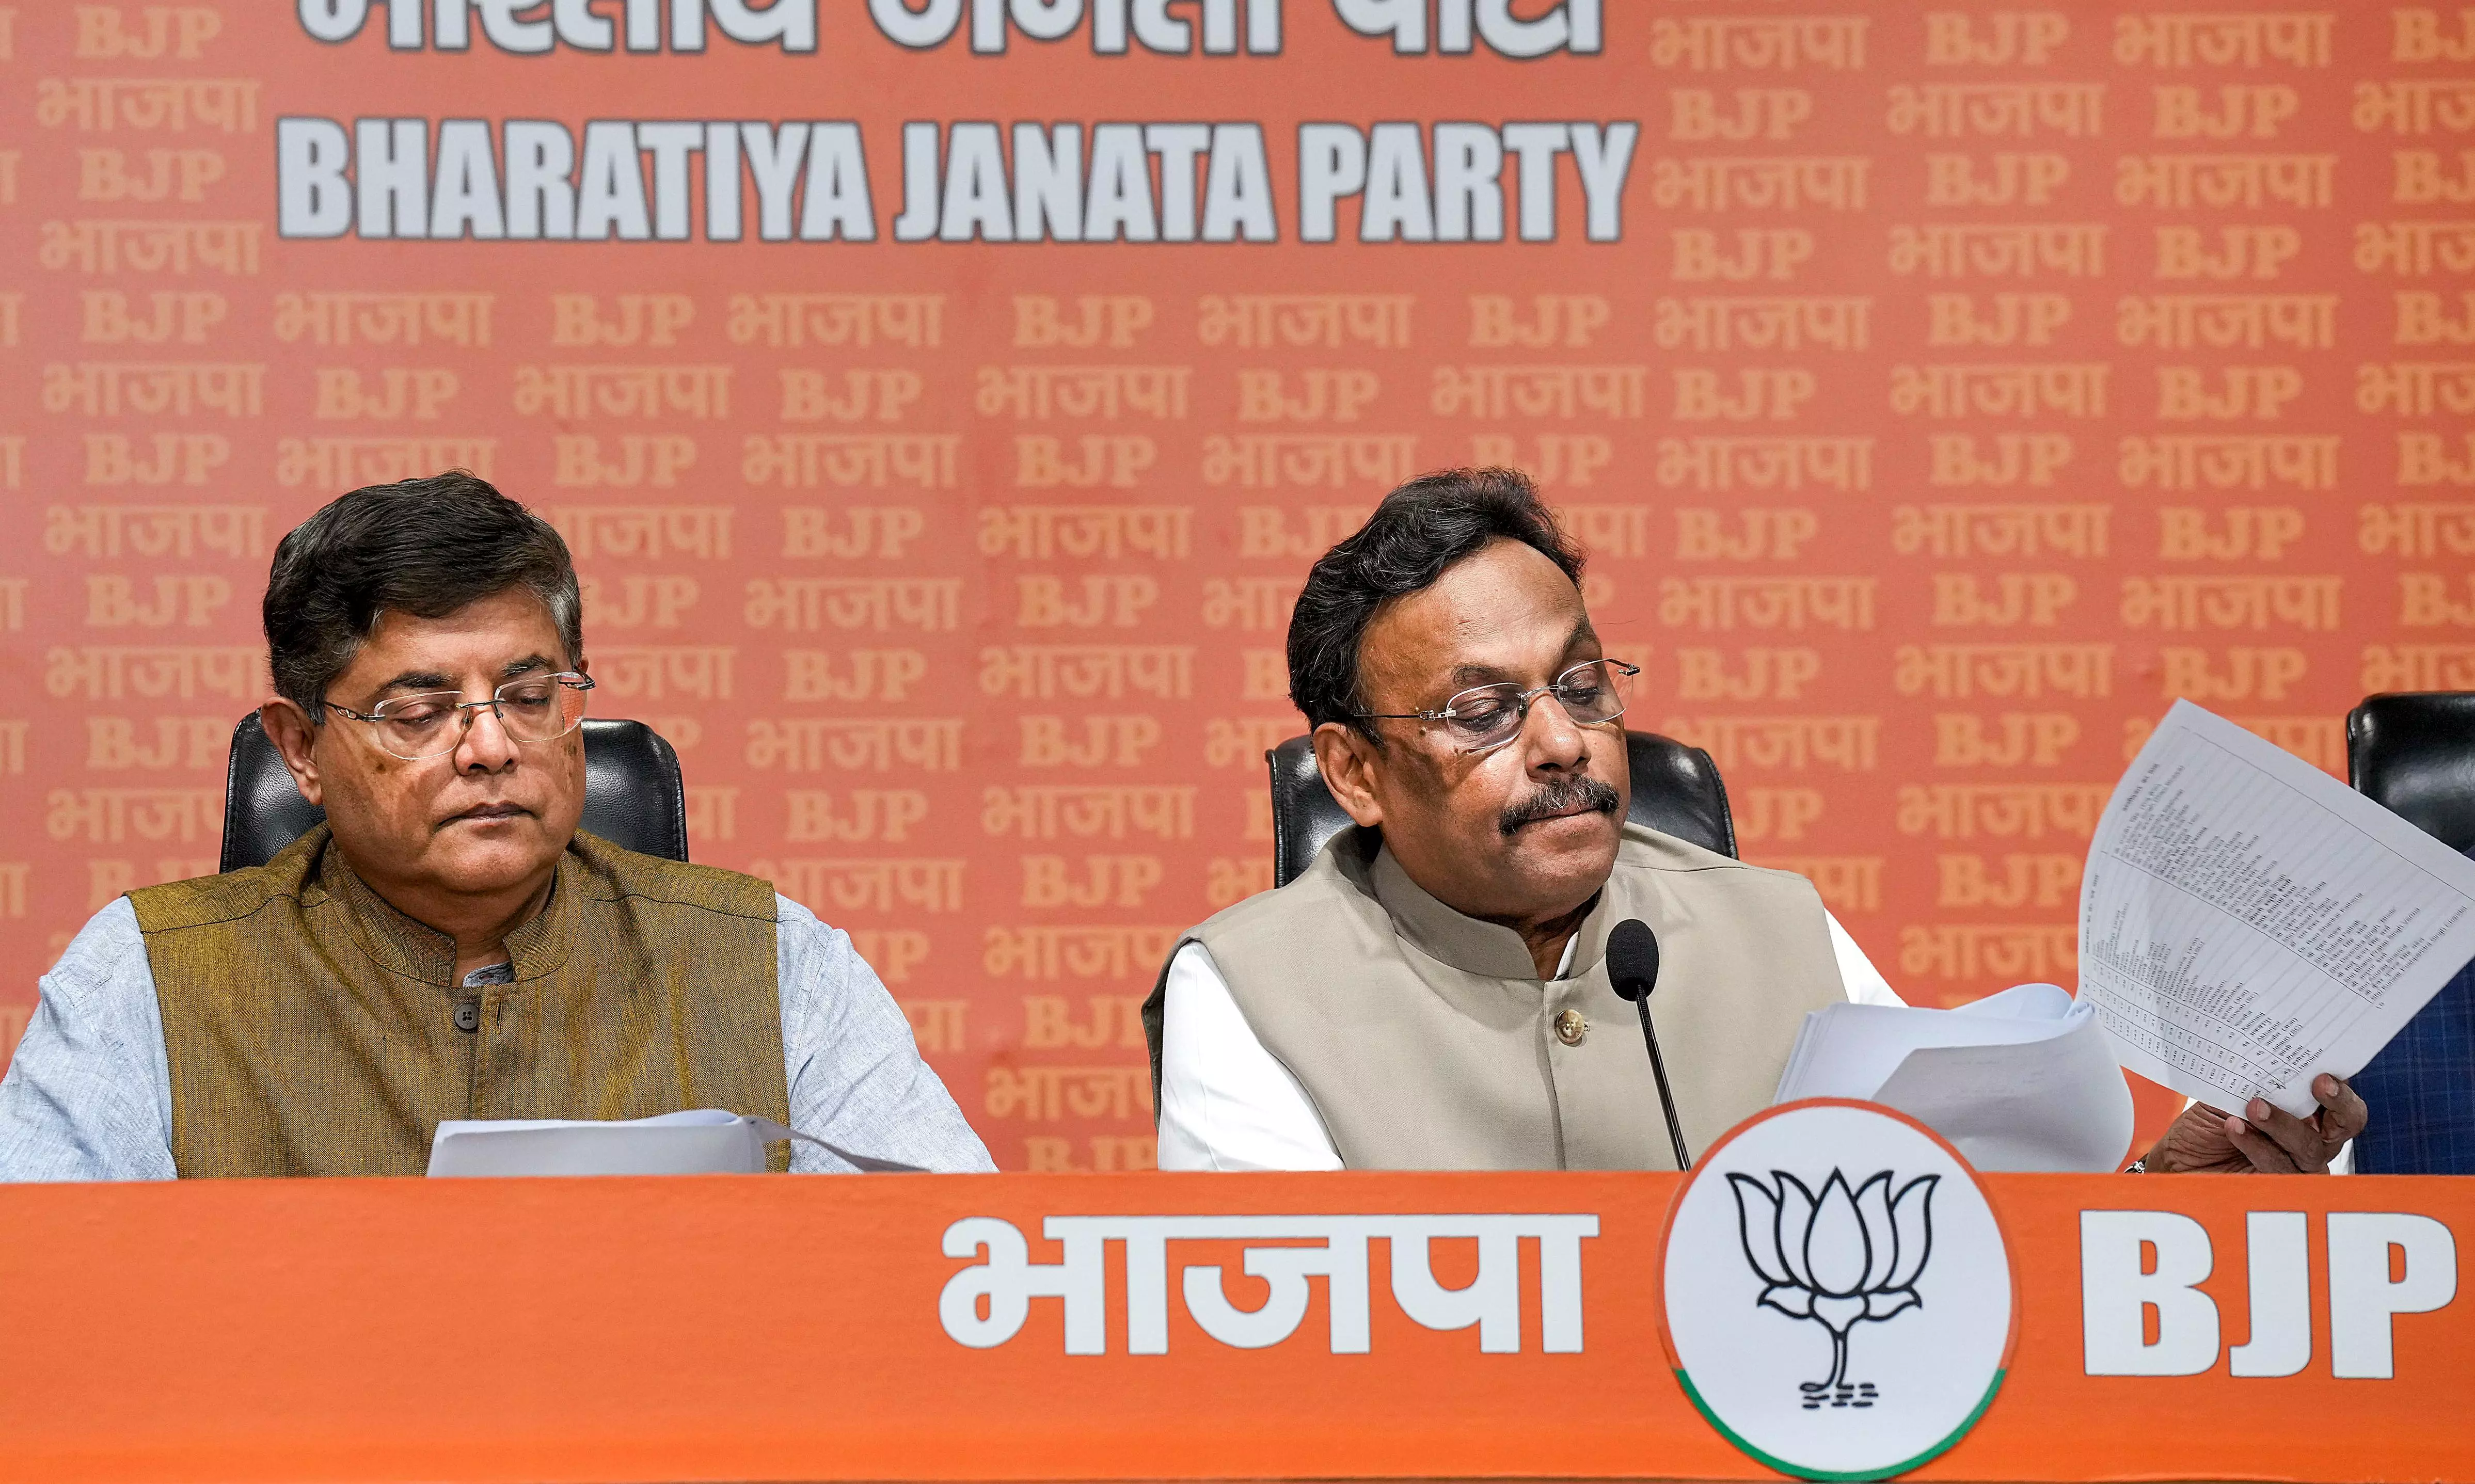 BJP Releases First List of 51 Candidates for UP, Modi to Contest from Varanasi